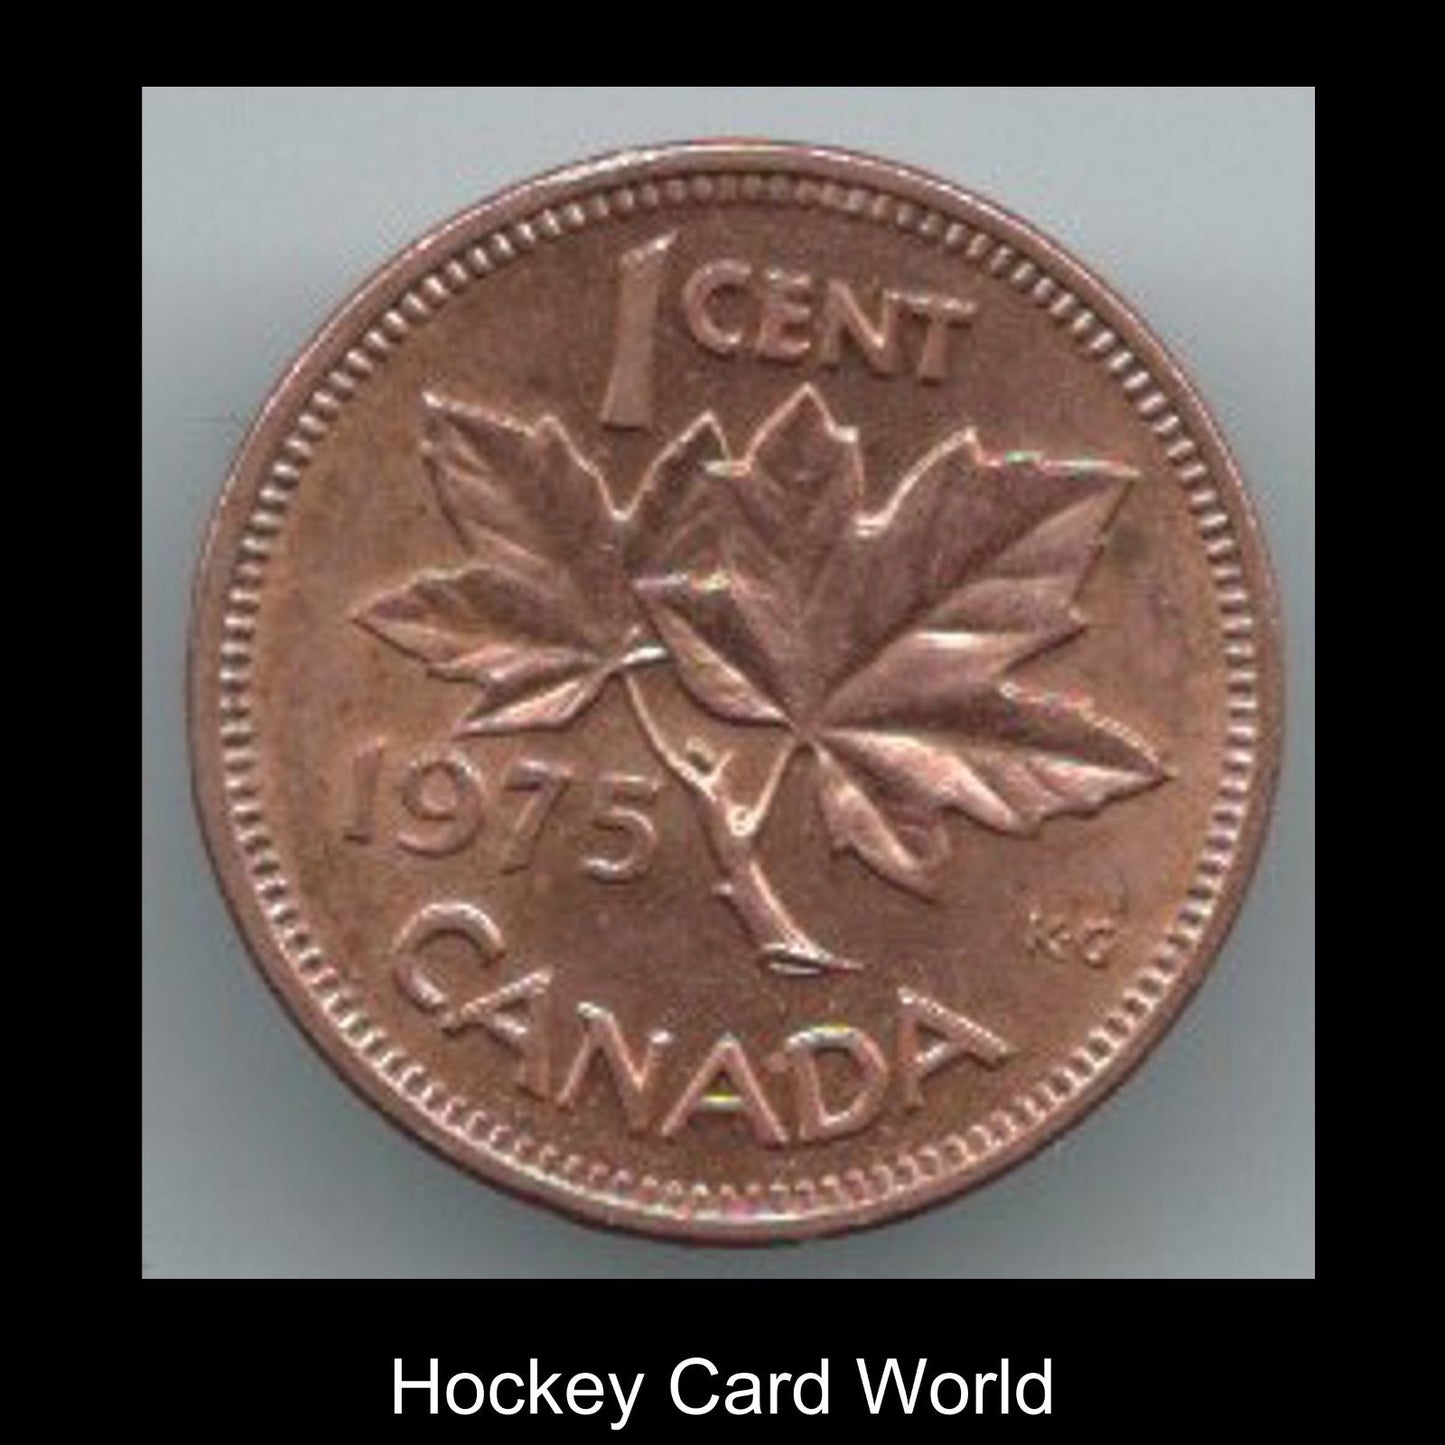 1975 Canadian 1 Cent Penny Coin Canada - Uncirculated Now *8001